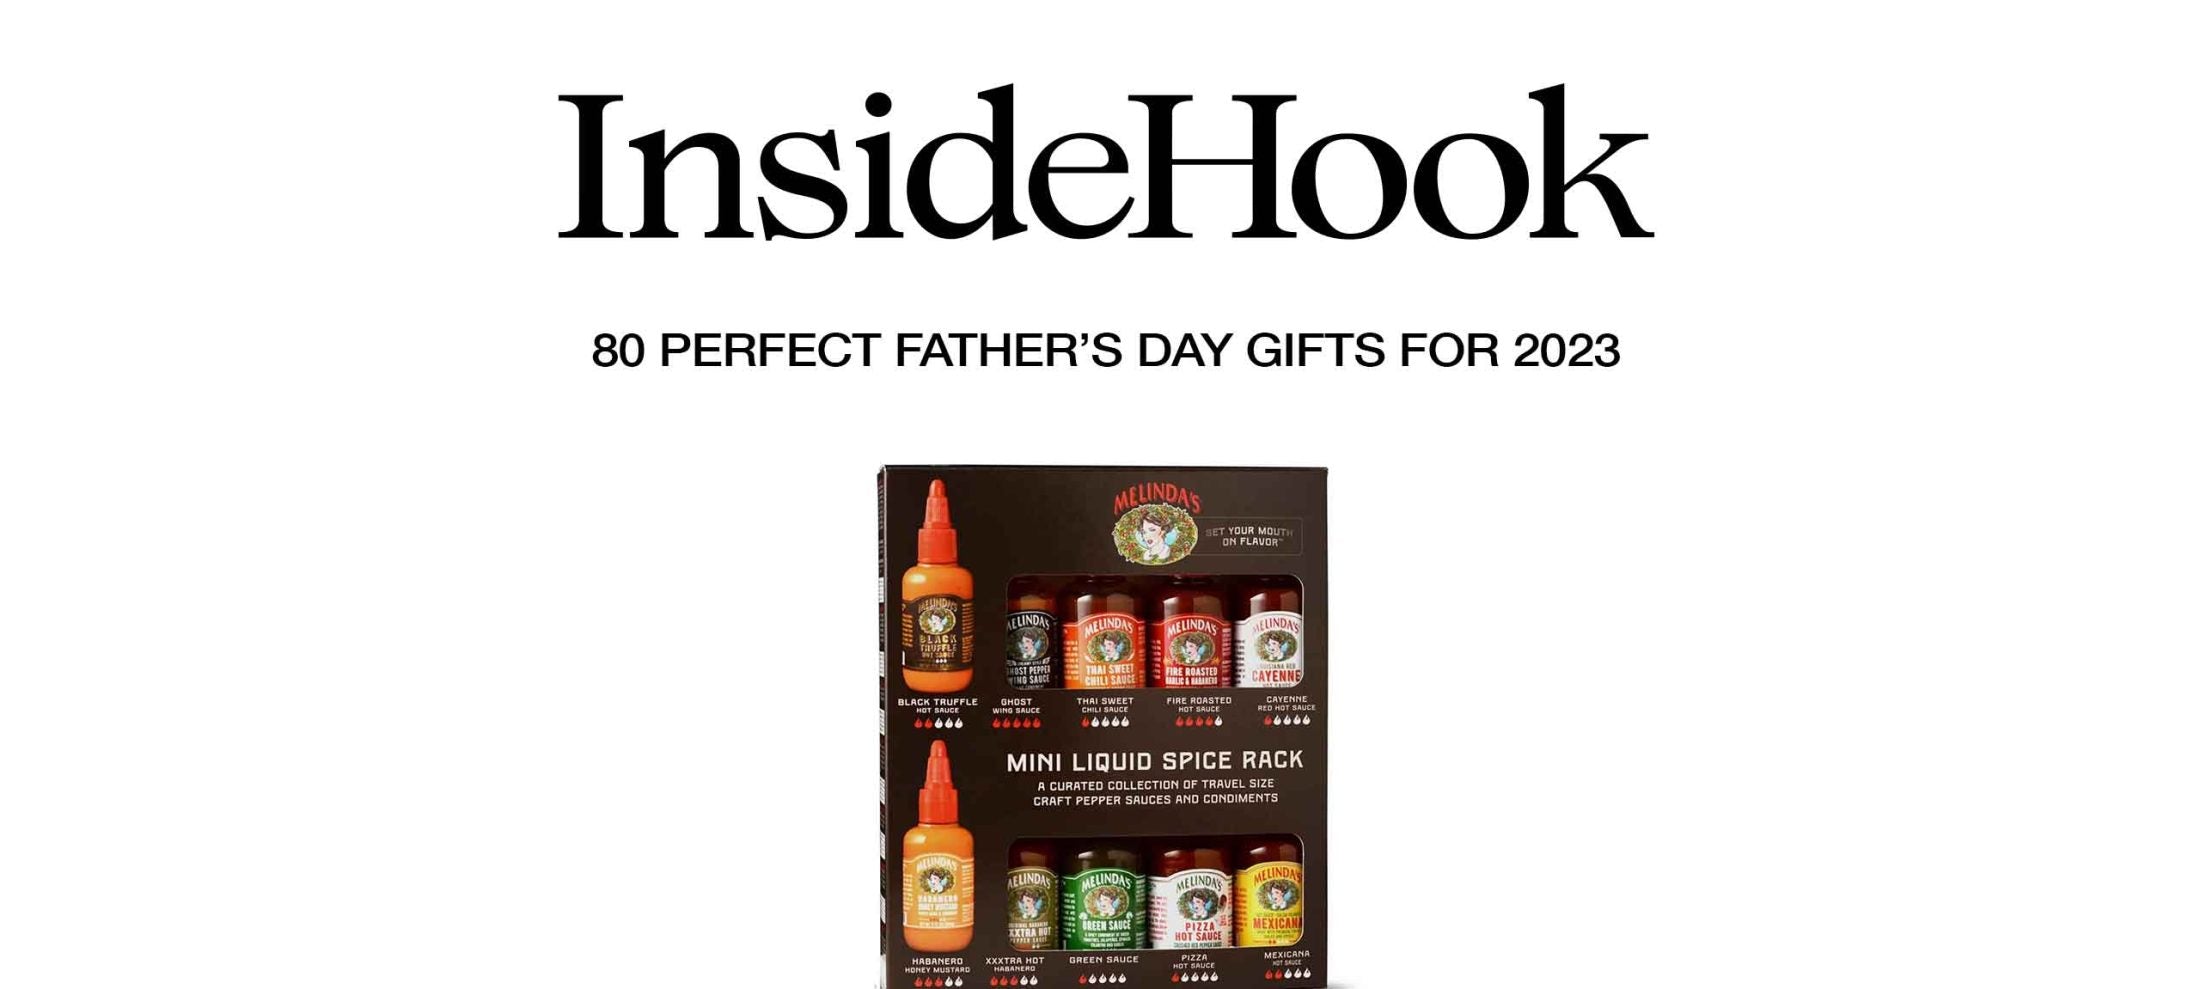 80 Perfect Father’s Day Gifts for 2023 | Says InsideHook